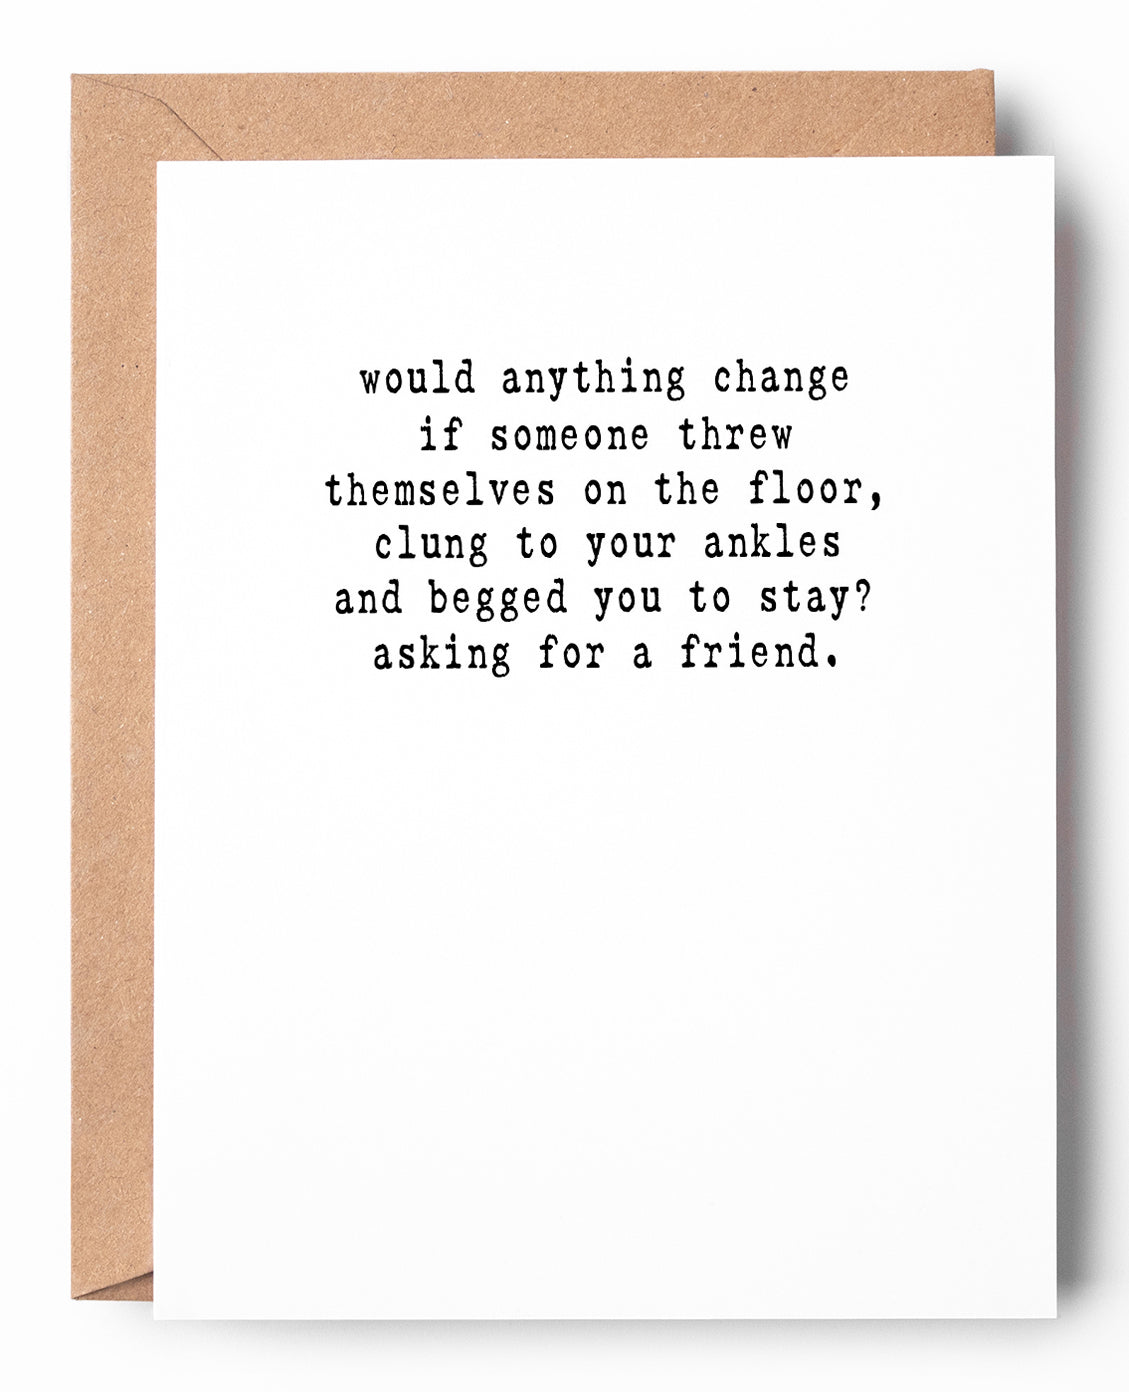 Funny letterpress goodbye card that says: Would anything change if someone threw themselves on the floor, clung to your ankles and begged you to stay? Asking for a friend.